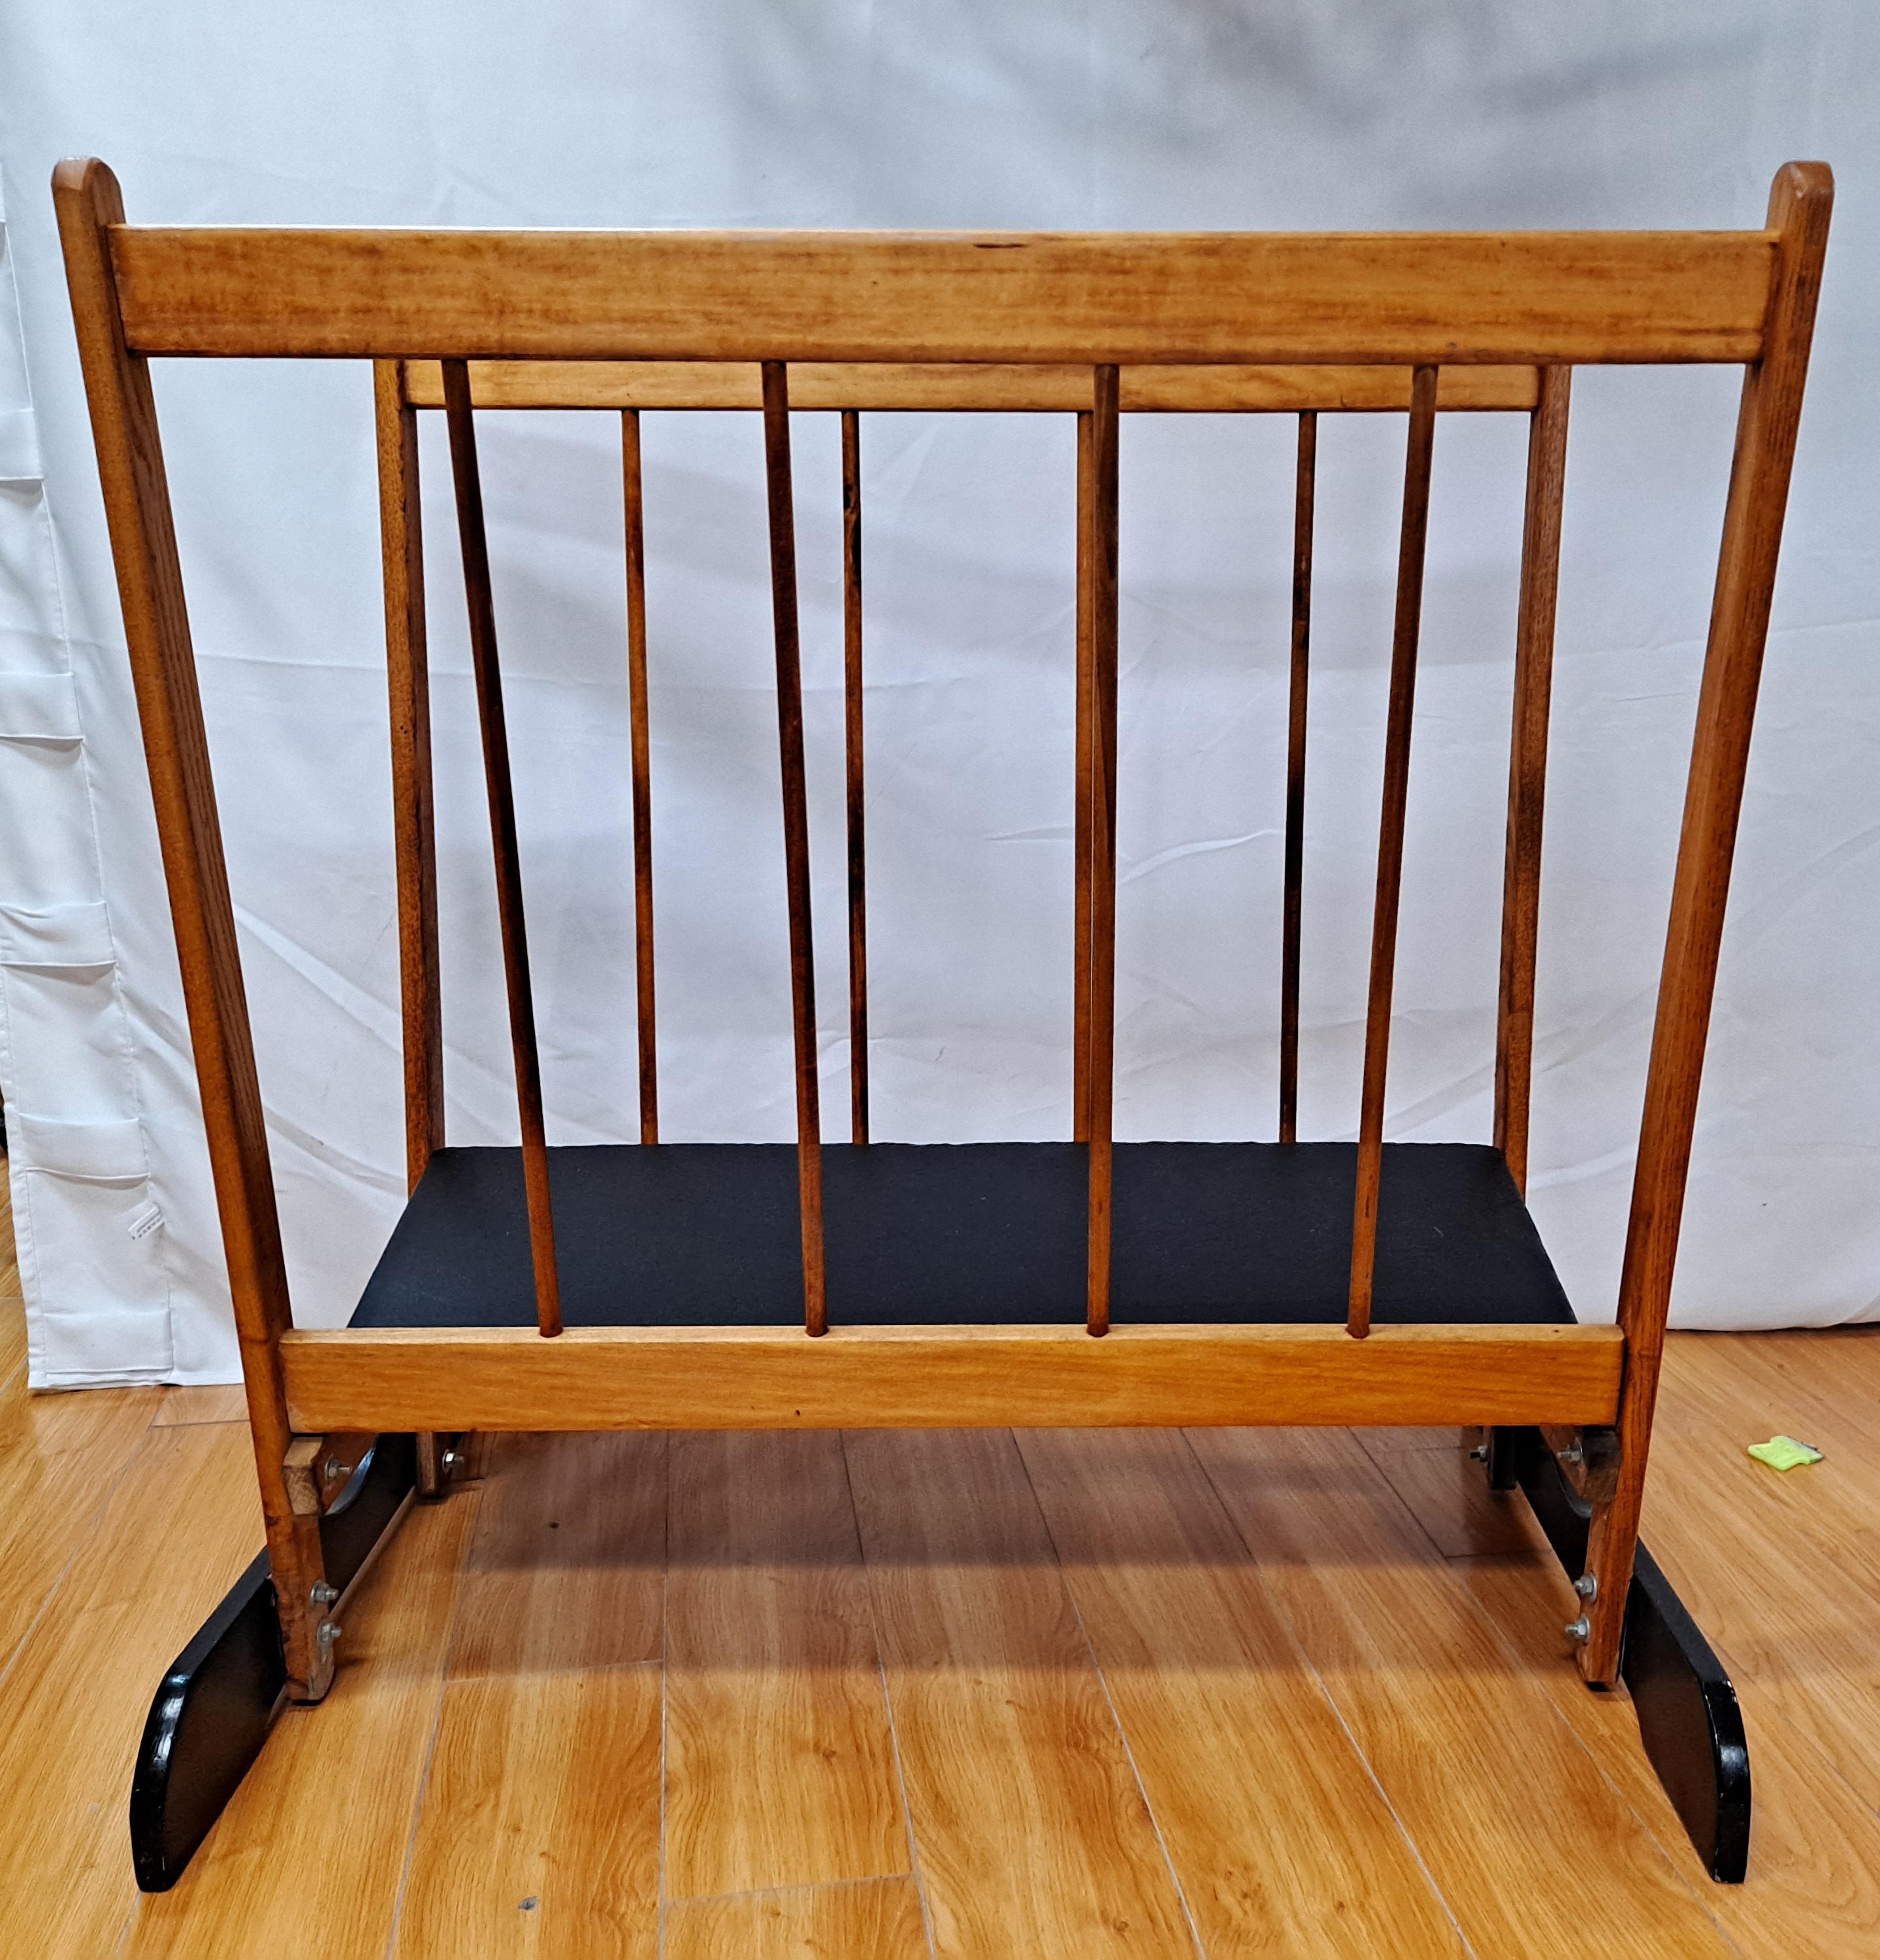 Vintage Art Storage Rack  In Good Condition For Sale In San Francisco, CA